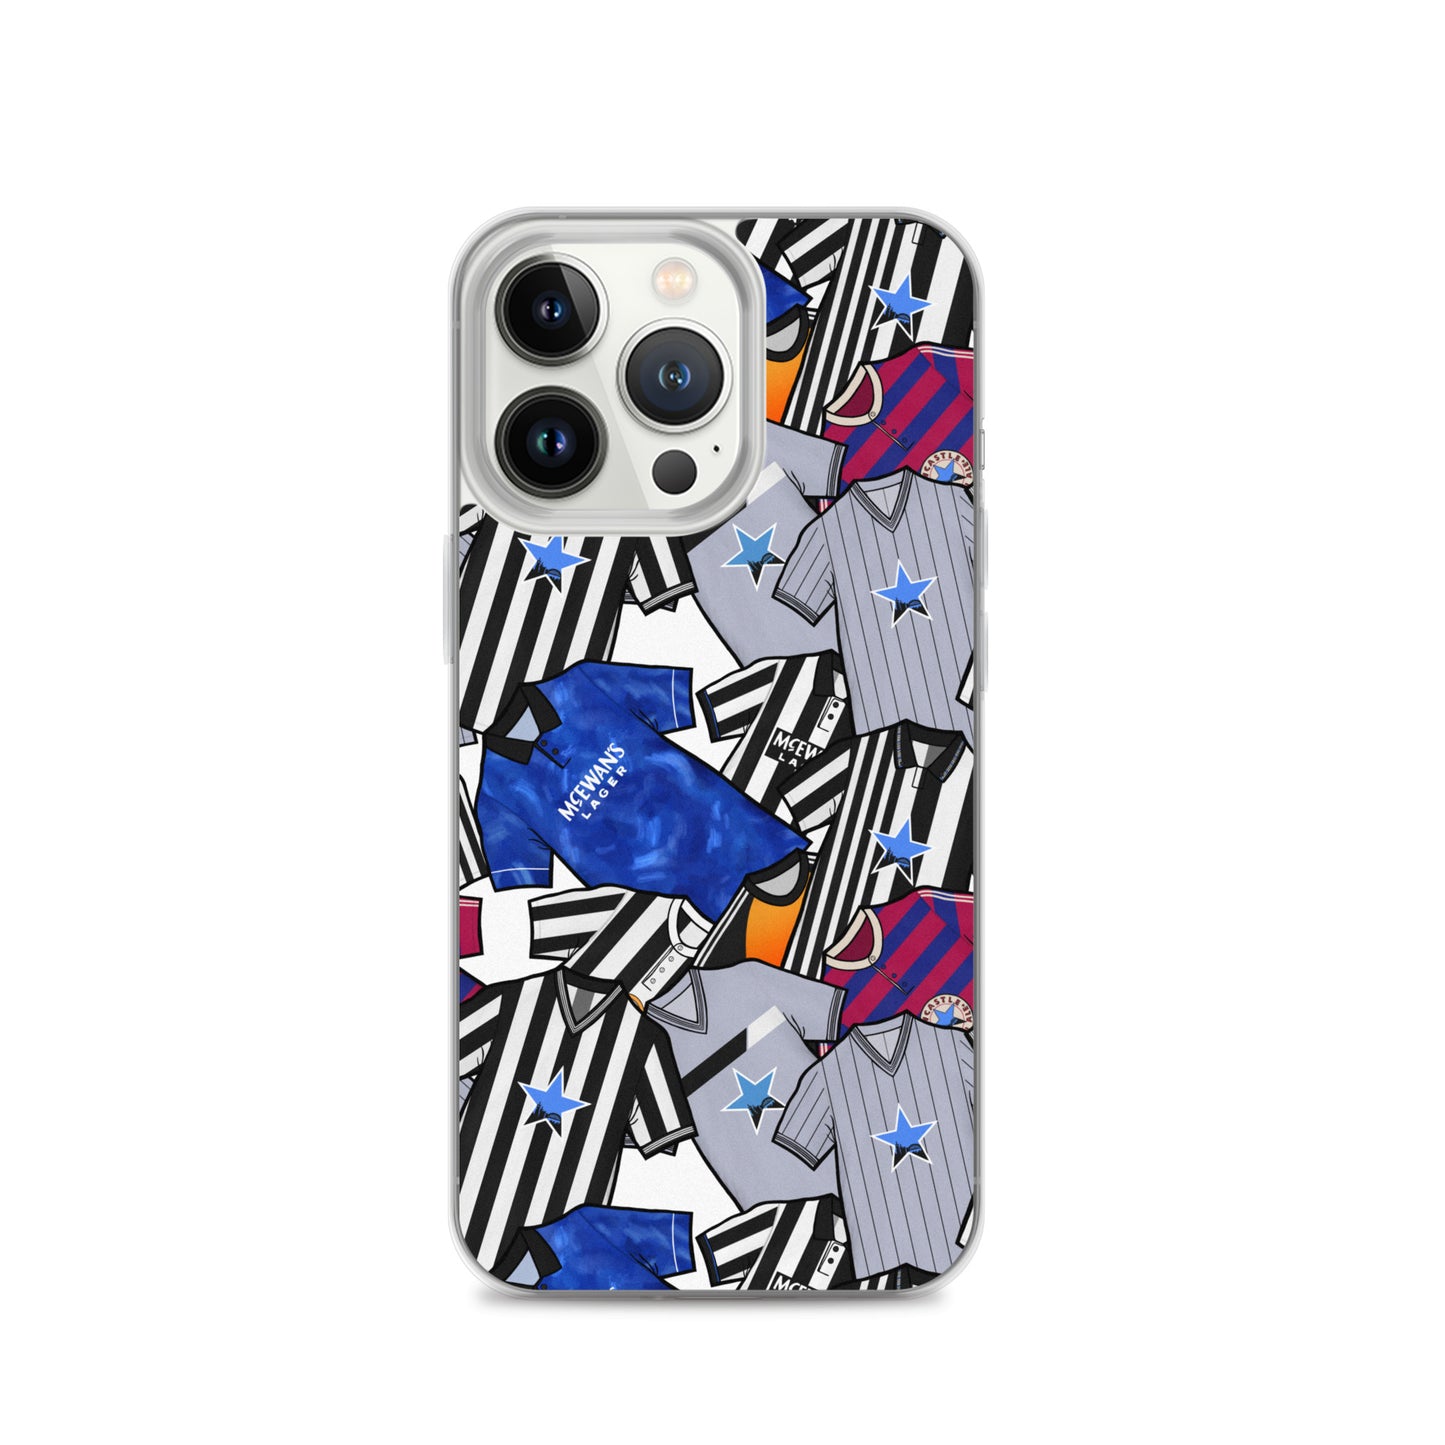 Phone case for iPhone 13 Pro inspired by the Retro shirts of Newcastle United!